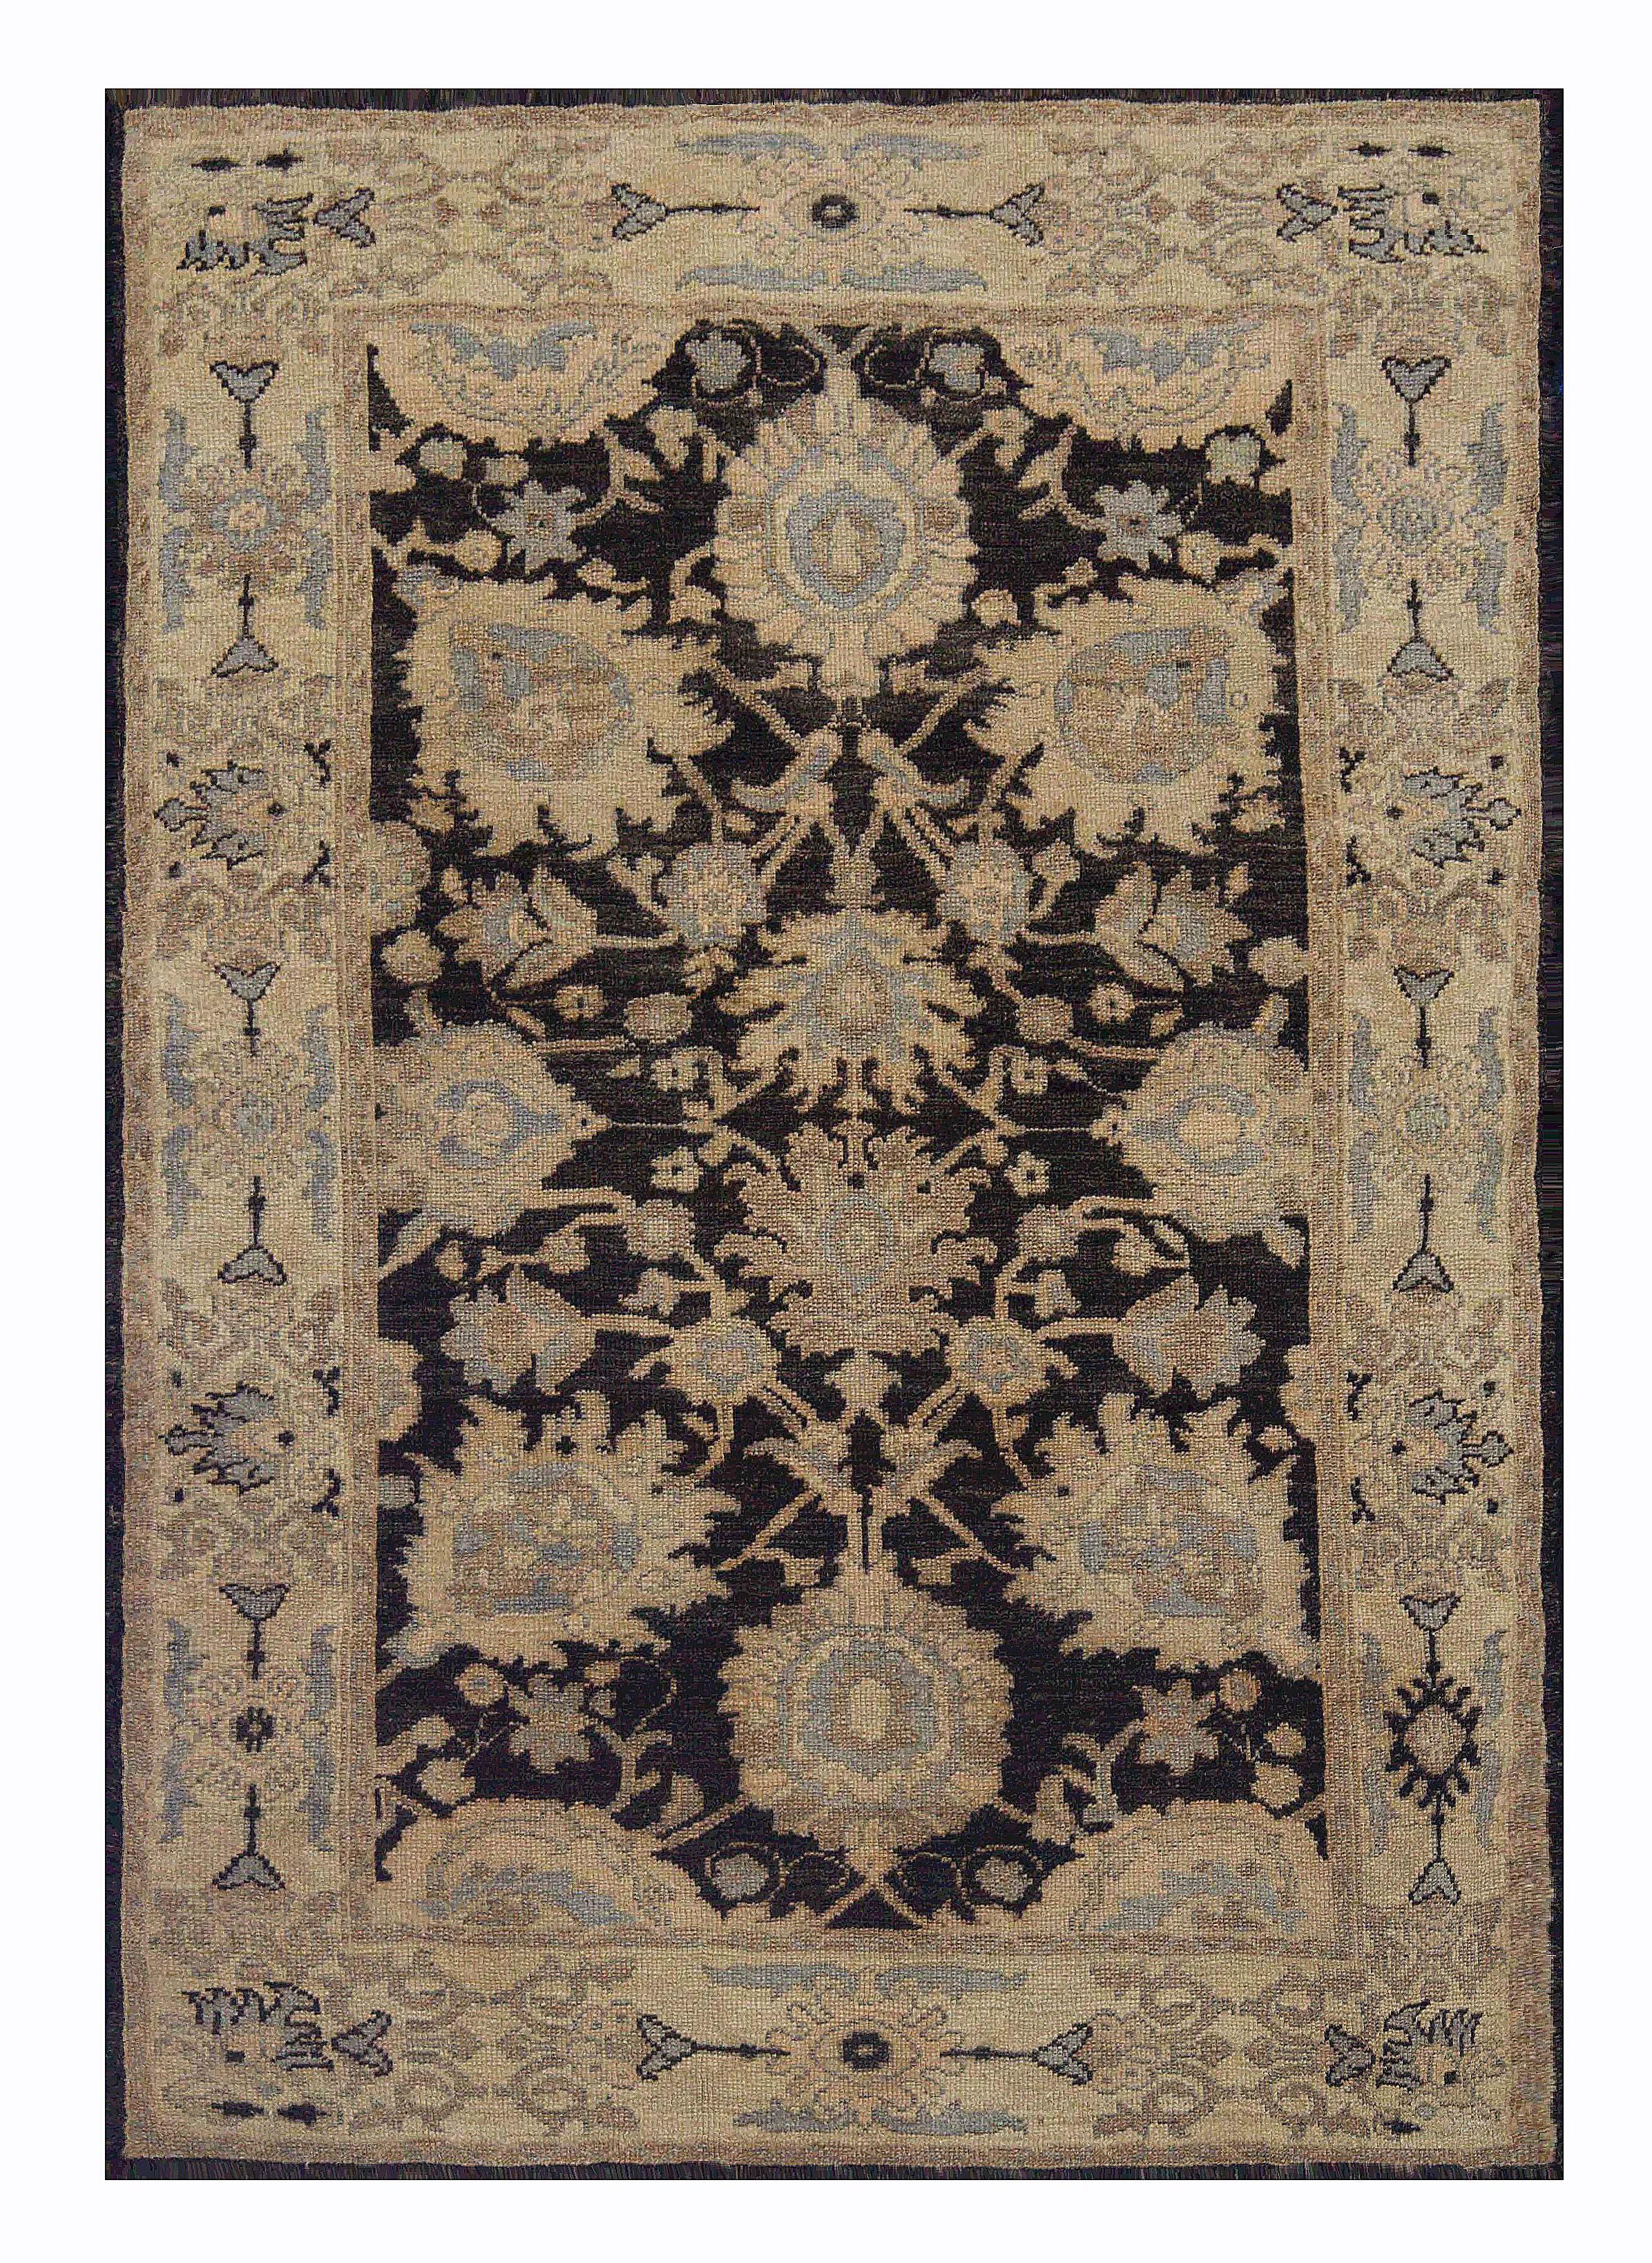 Contemporary Turkish rug made of handwoven sheep’s wool of the finest quality. It’s colored with organic vegetable dyes that are certified safe for humans and pets alike. It features a black center field with flower details in gray and beige